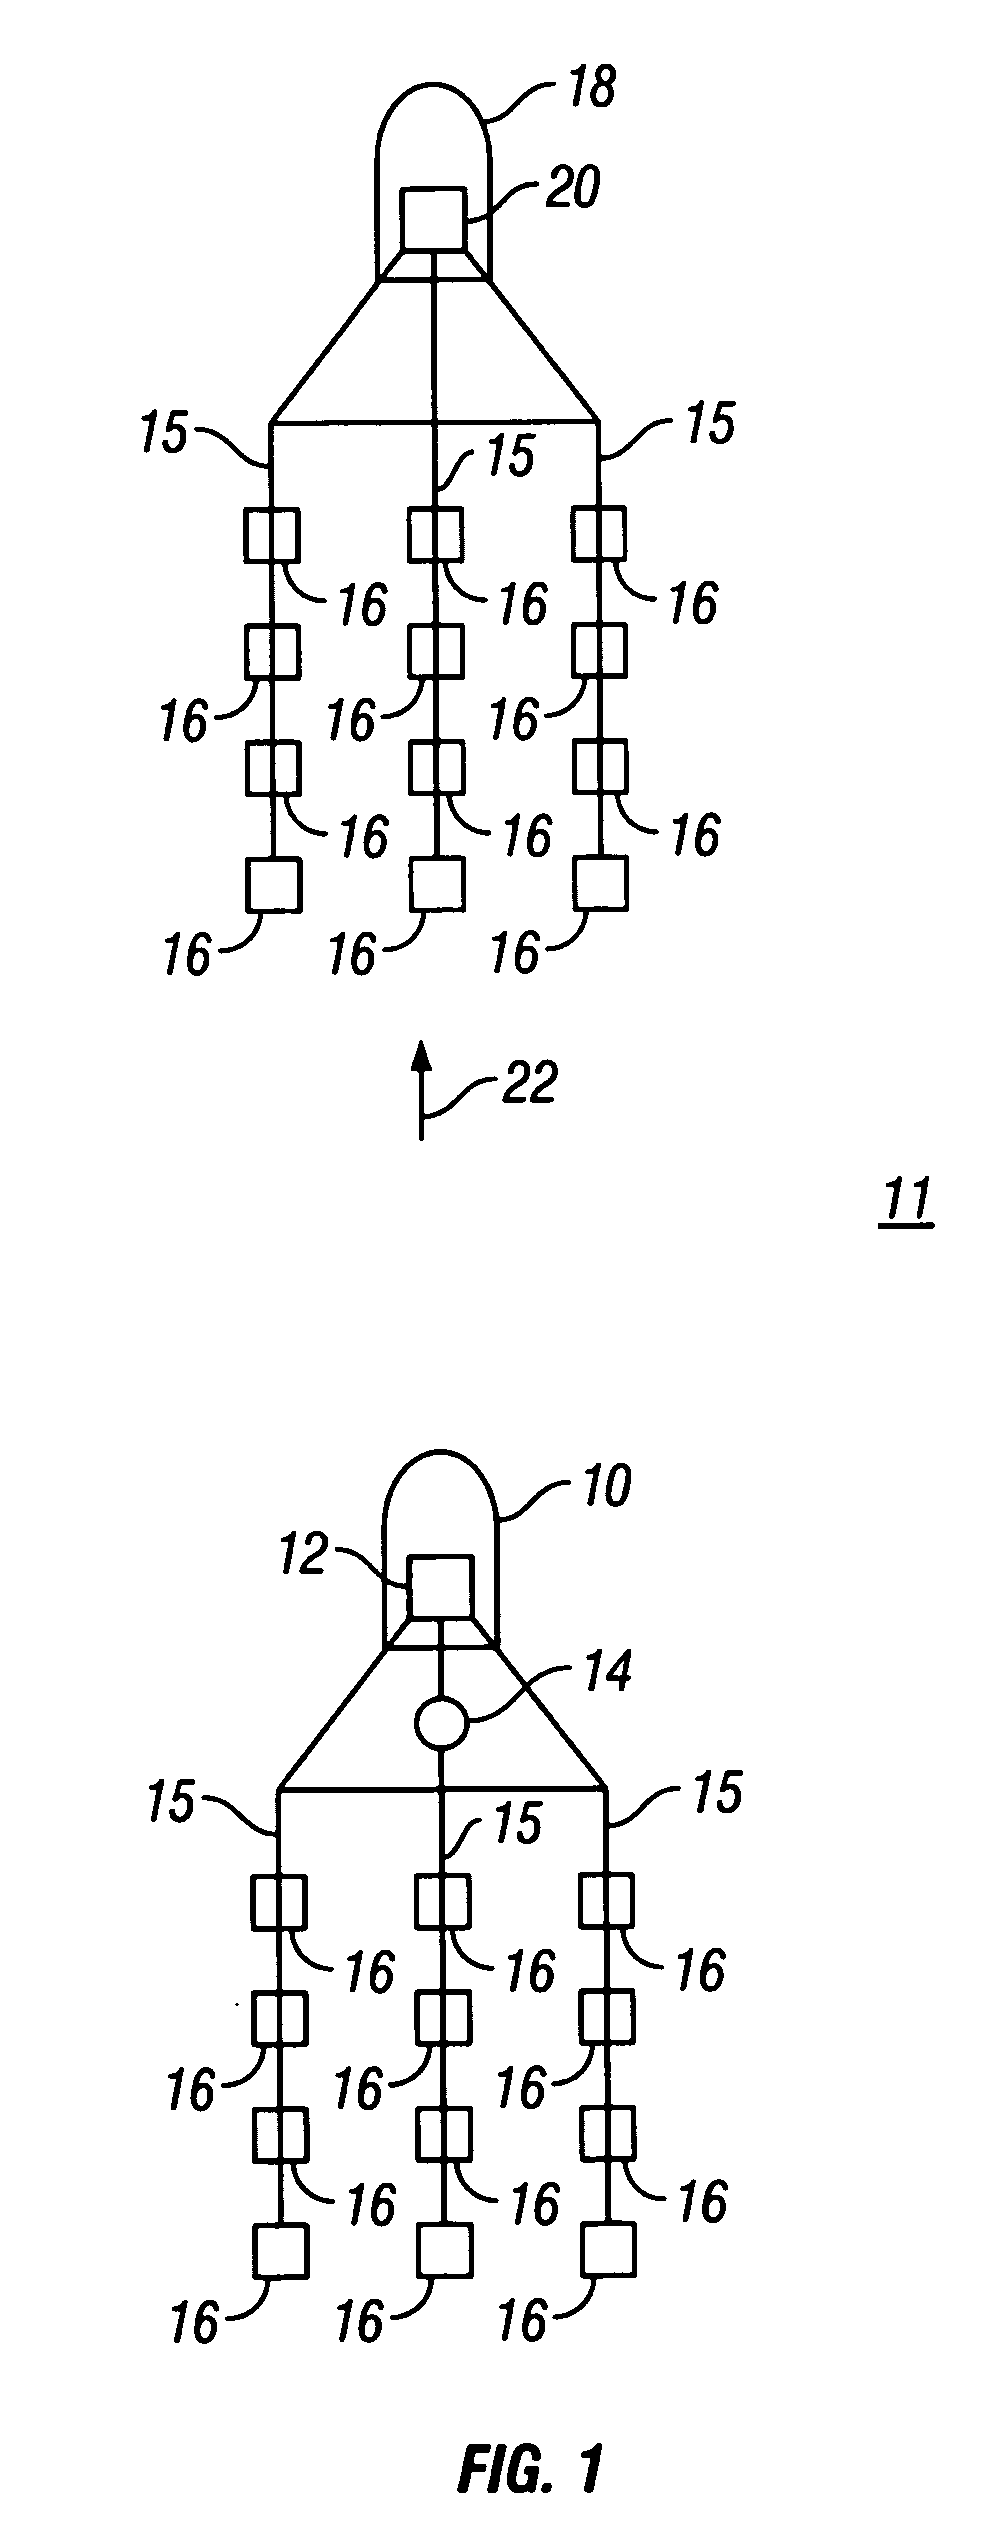 Method for correcting seismic data for receiver movement during data acquisition